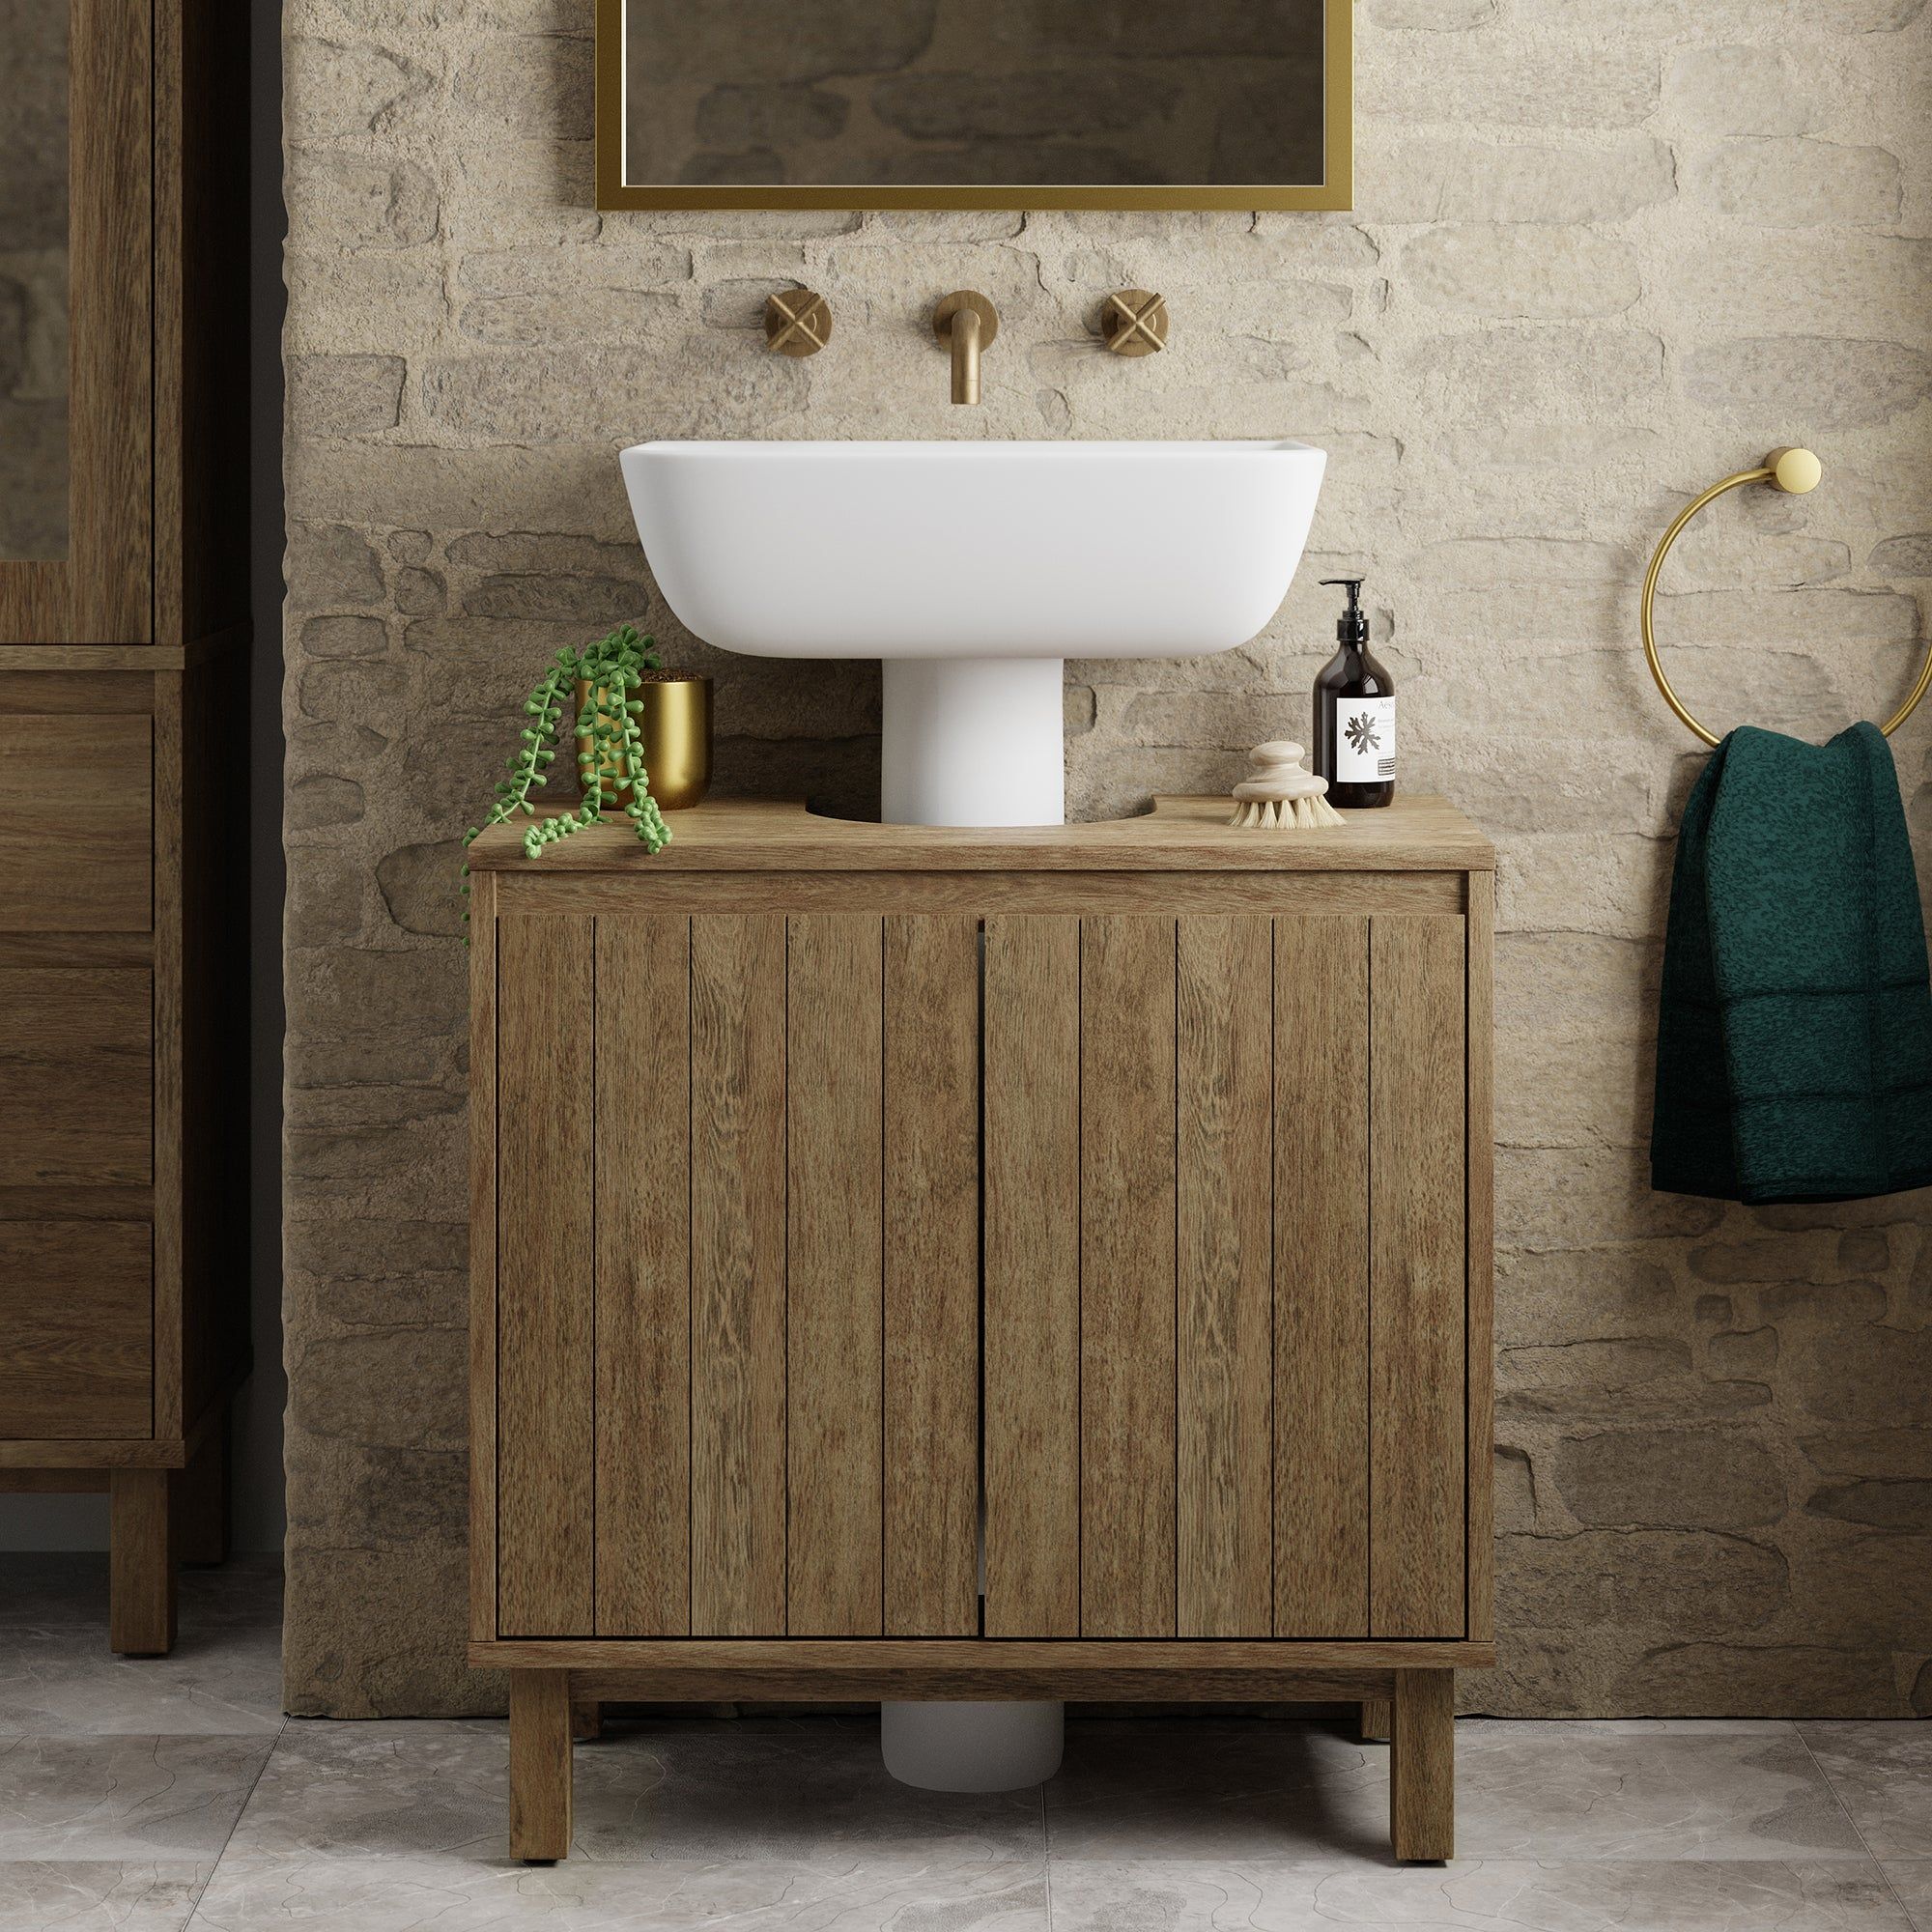 Innovative Bathroom Sink Units: The Perfect Combination of Style and Functionality